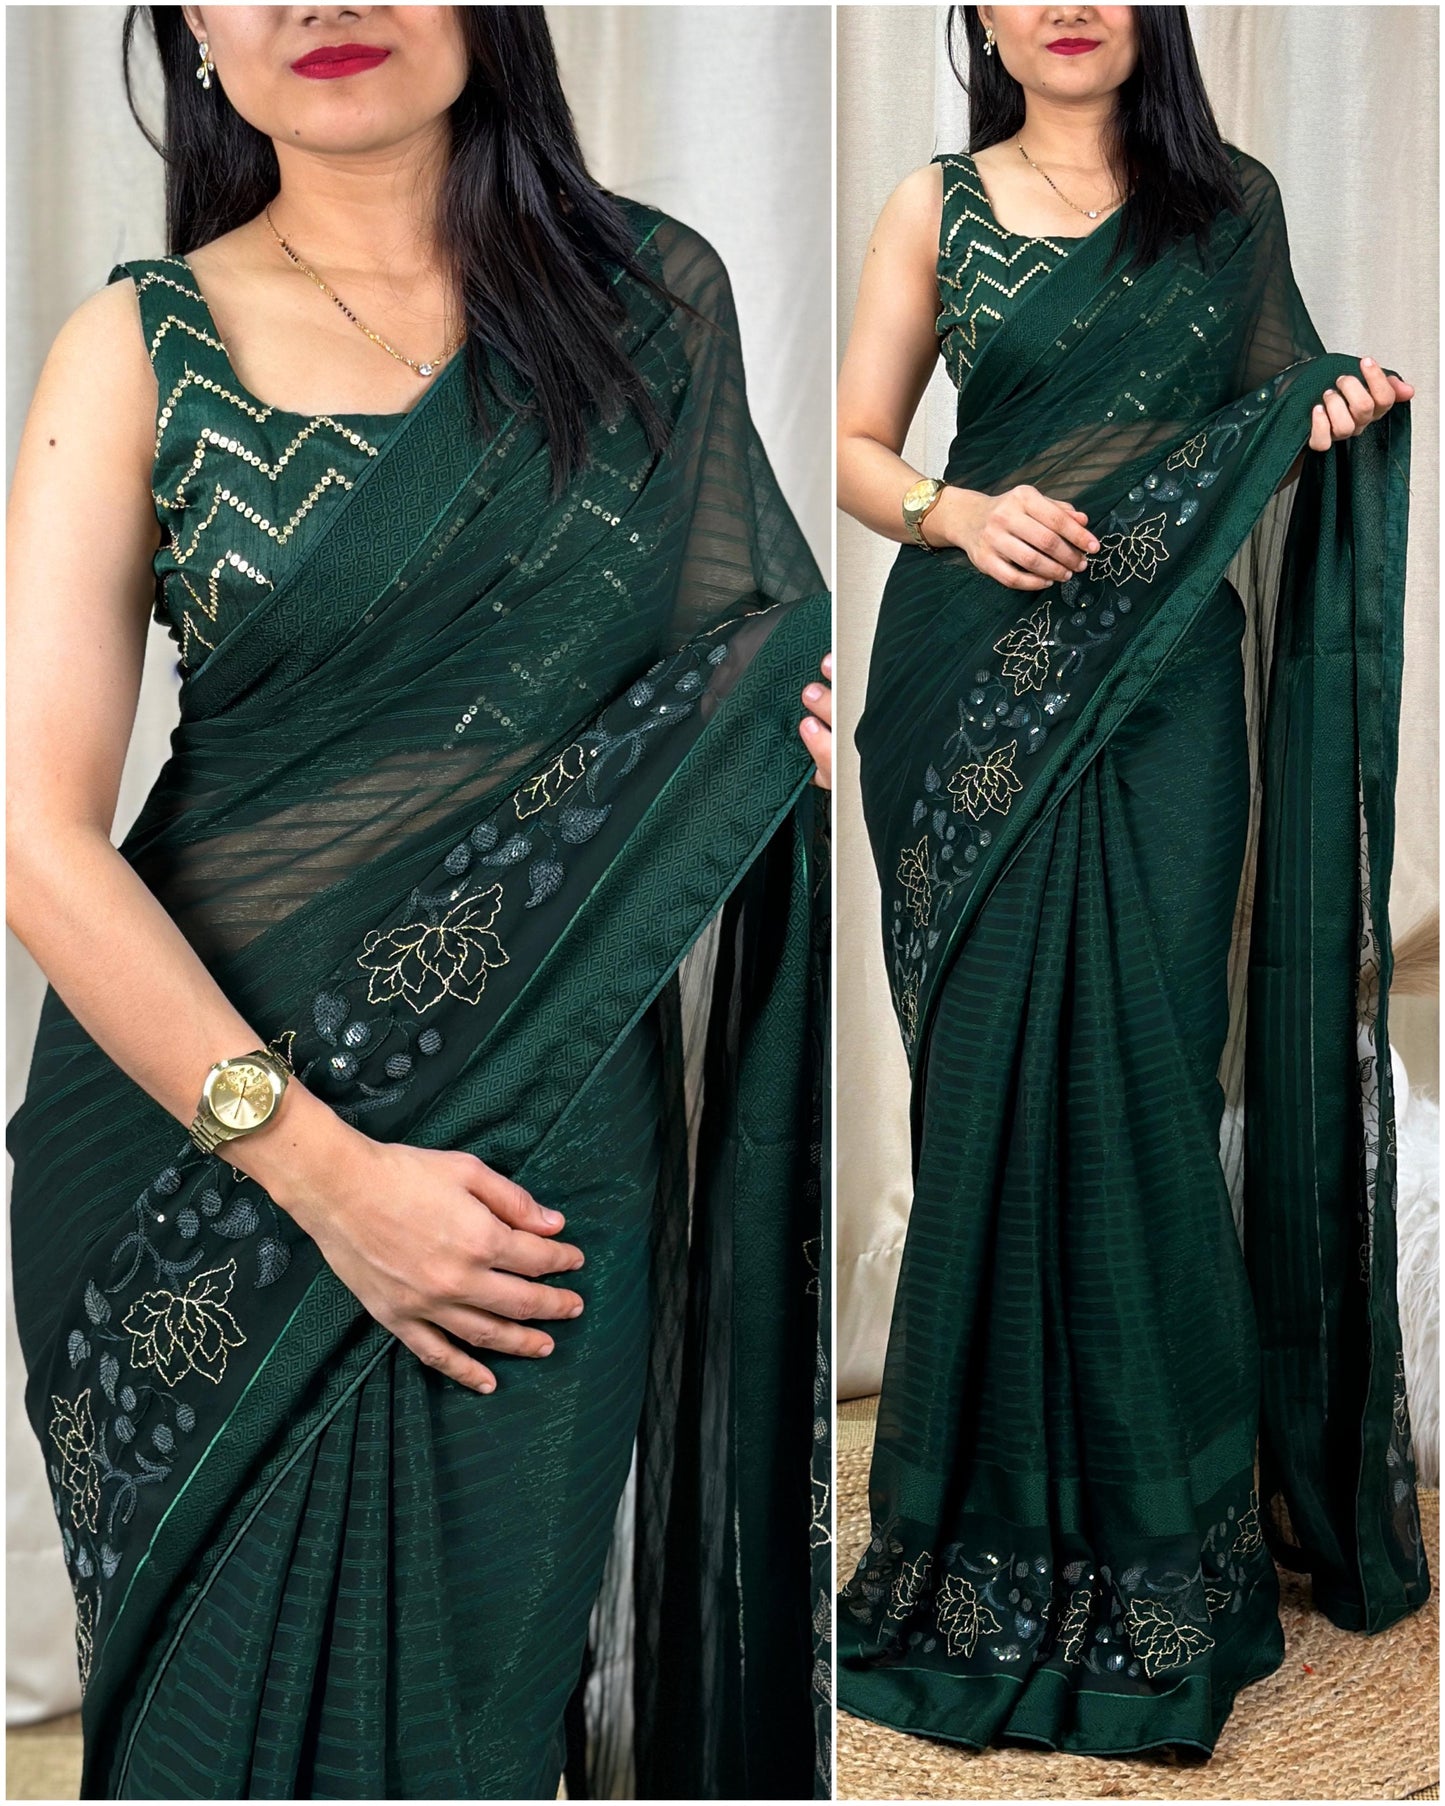 "Trendy Sequins Saree - Shine in Simmer Chiffon with Mono Banglori Blouse"